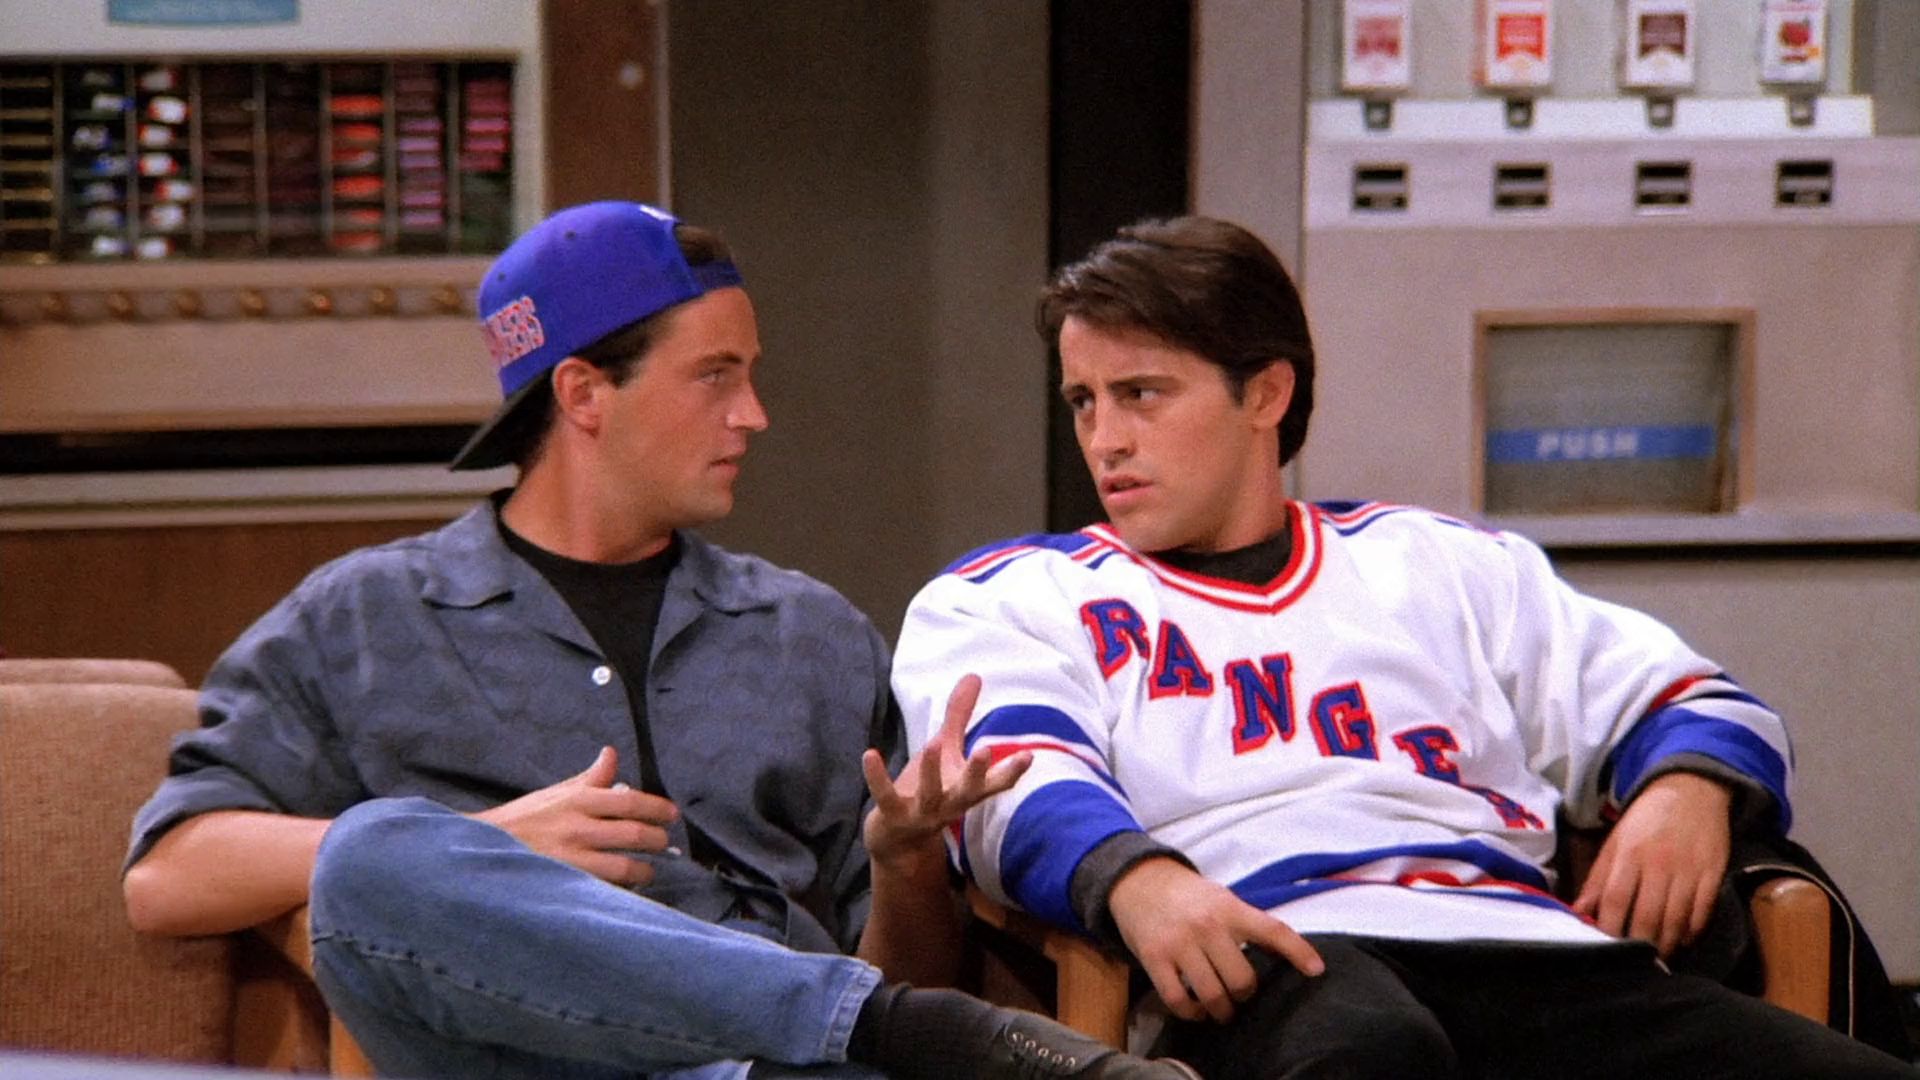 Chandler and Joey | Take this friends who said it quiz!